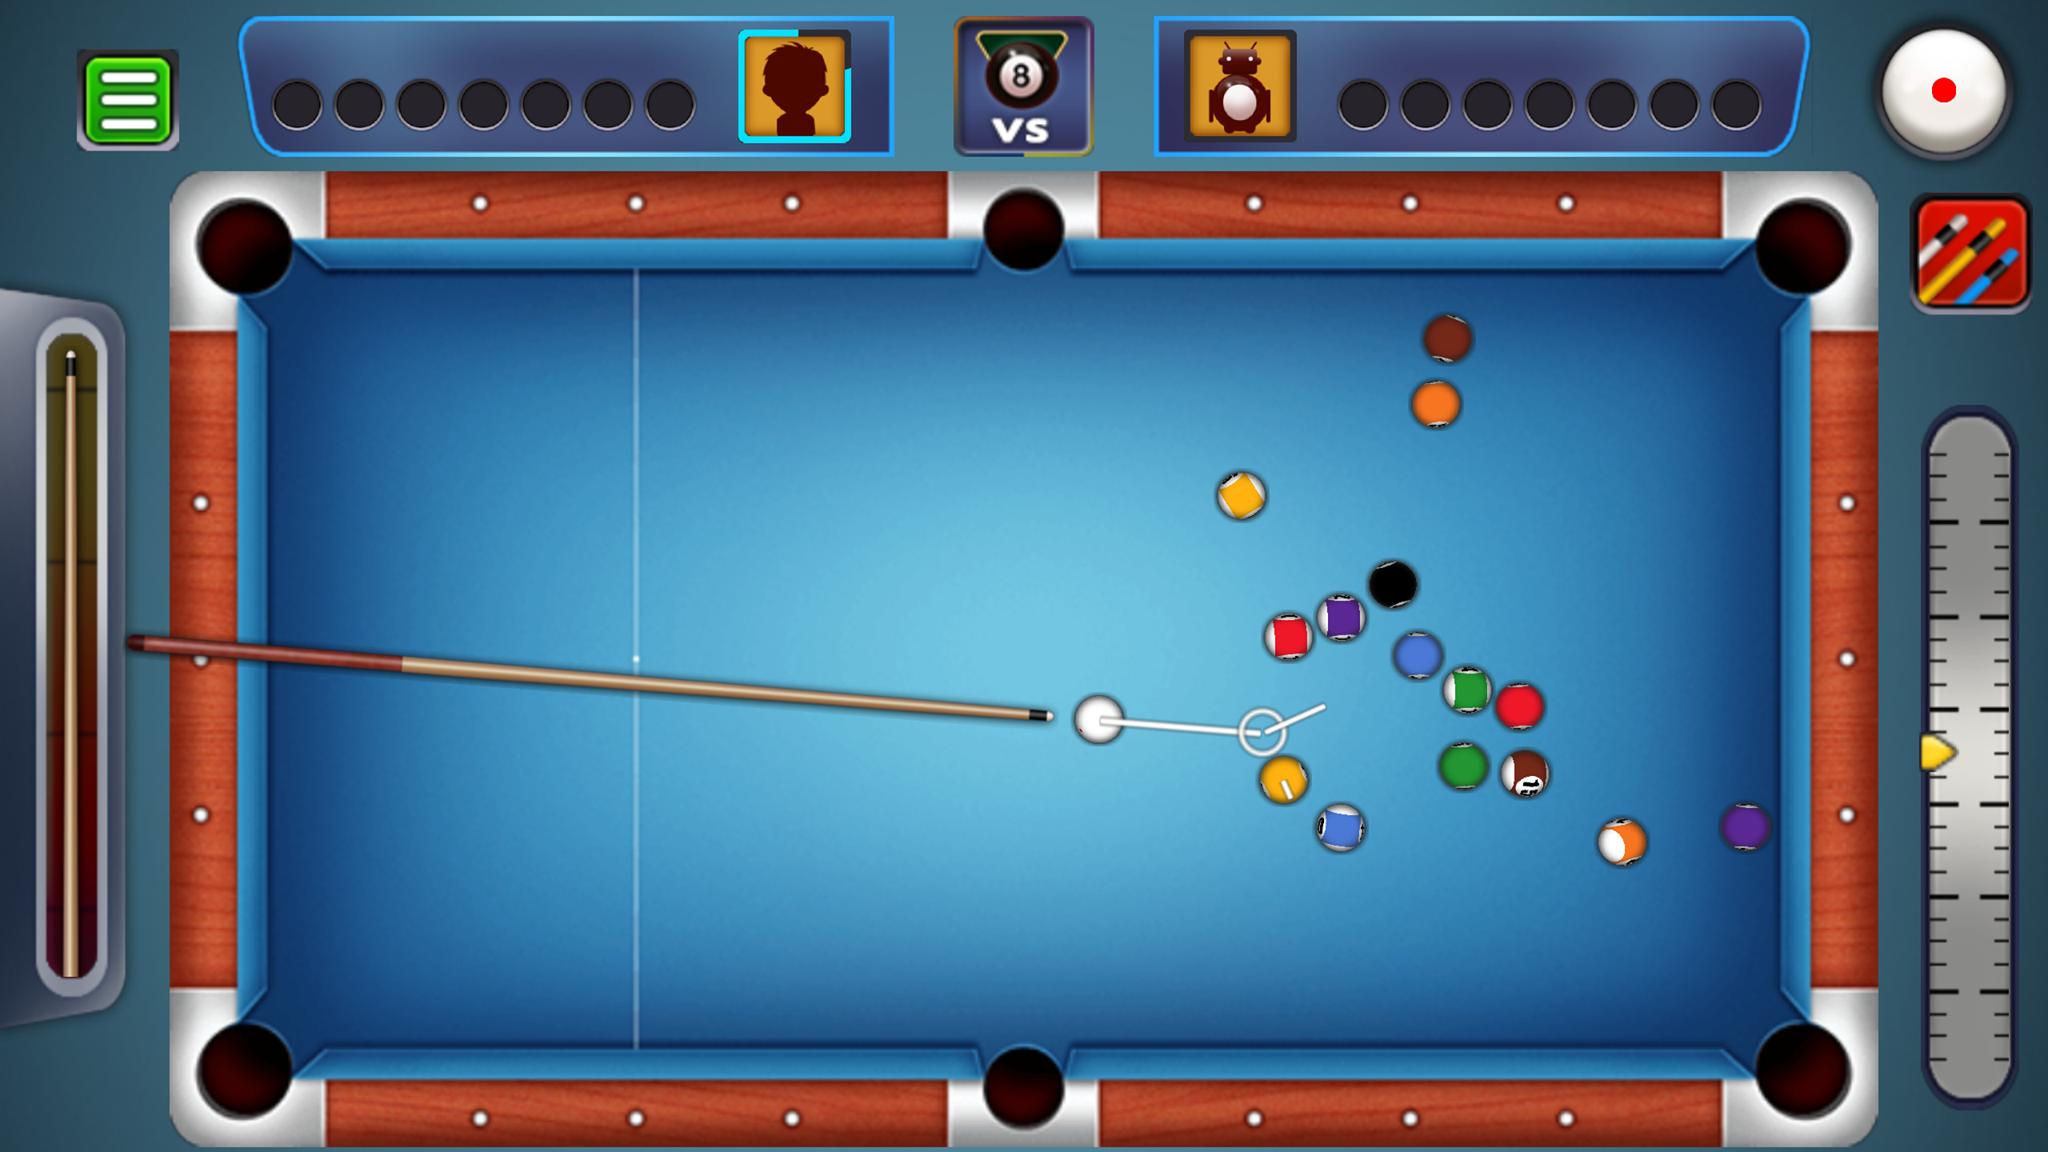 8 Ball pool snooker for Android - APK Download - 